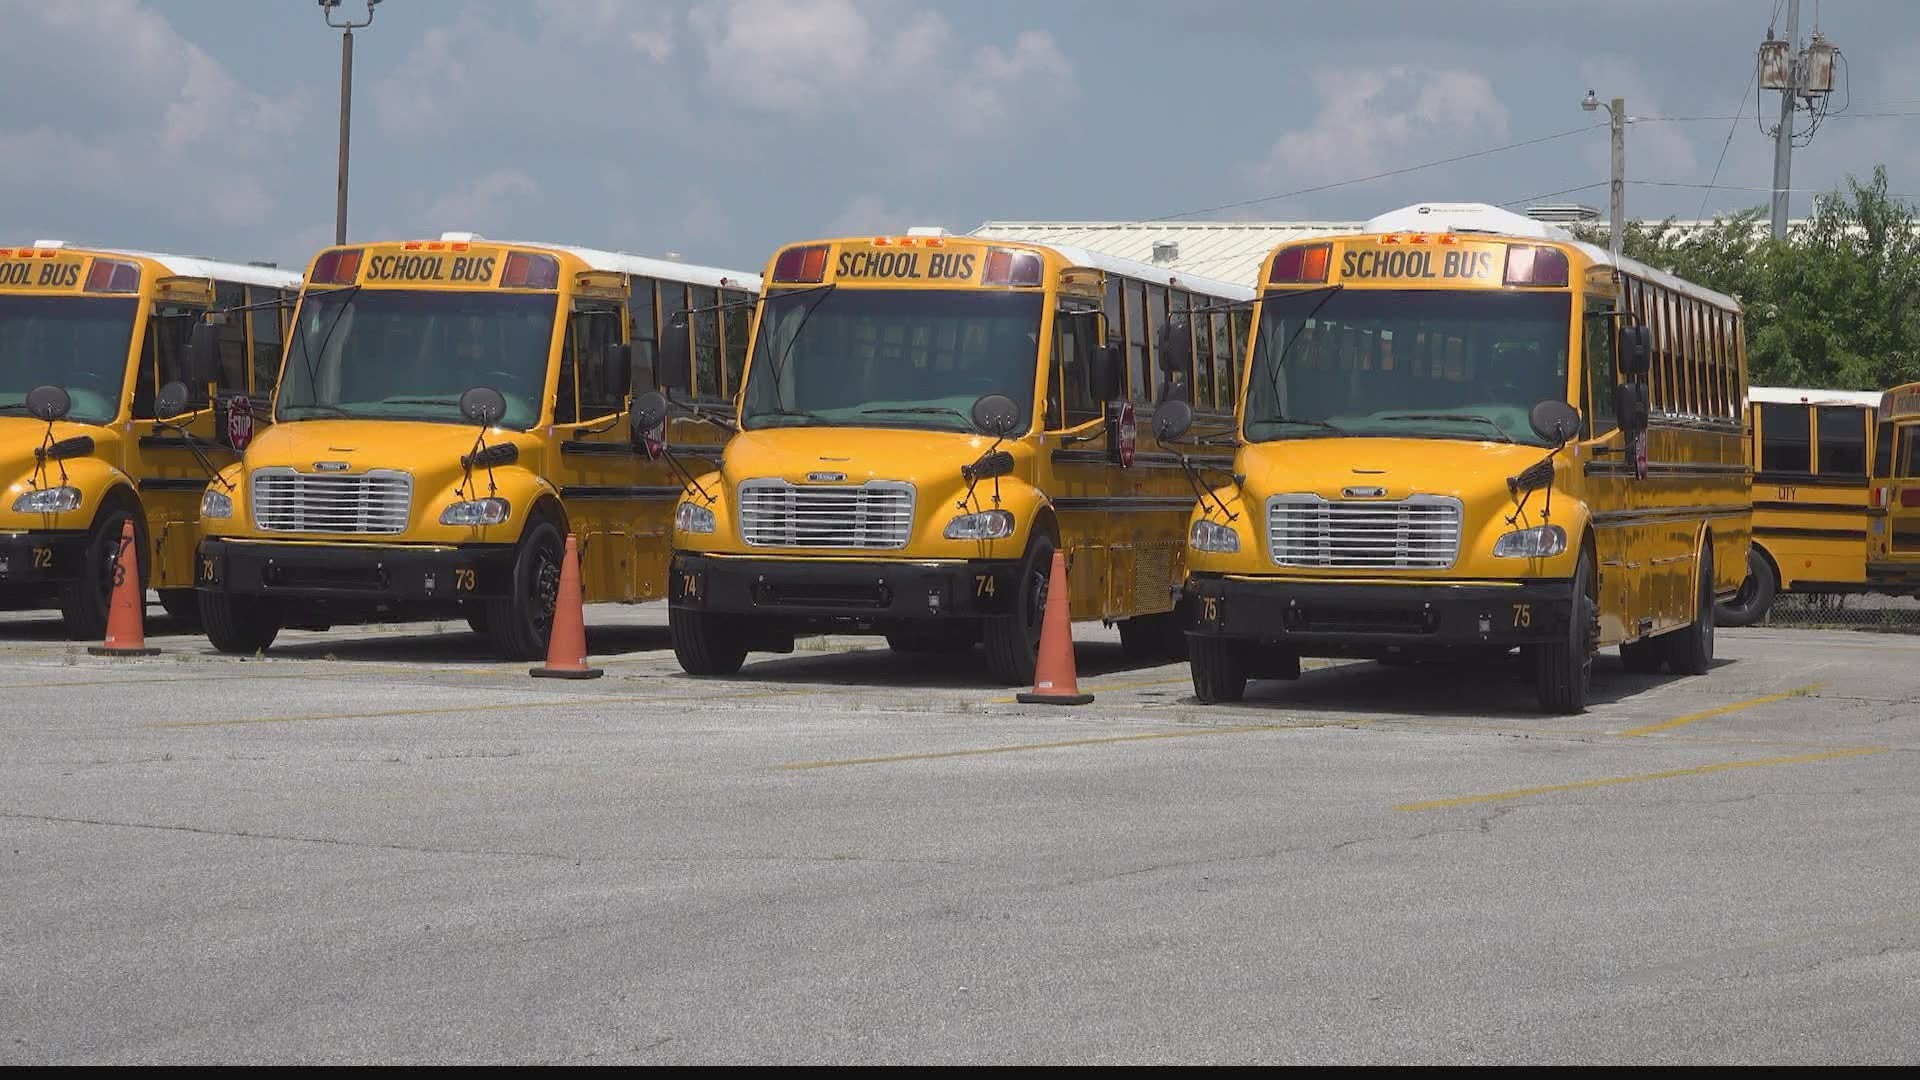 In Alabama, the minimum fine for passing a stopped school bus is $150.